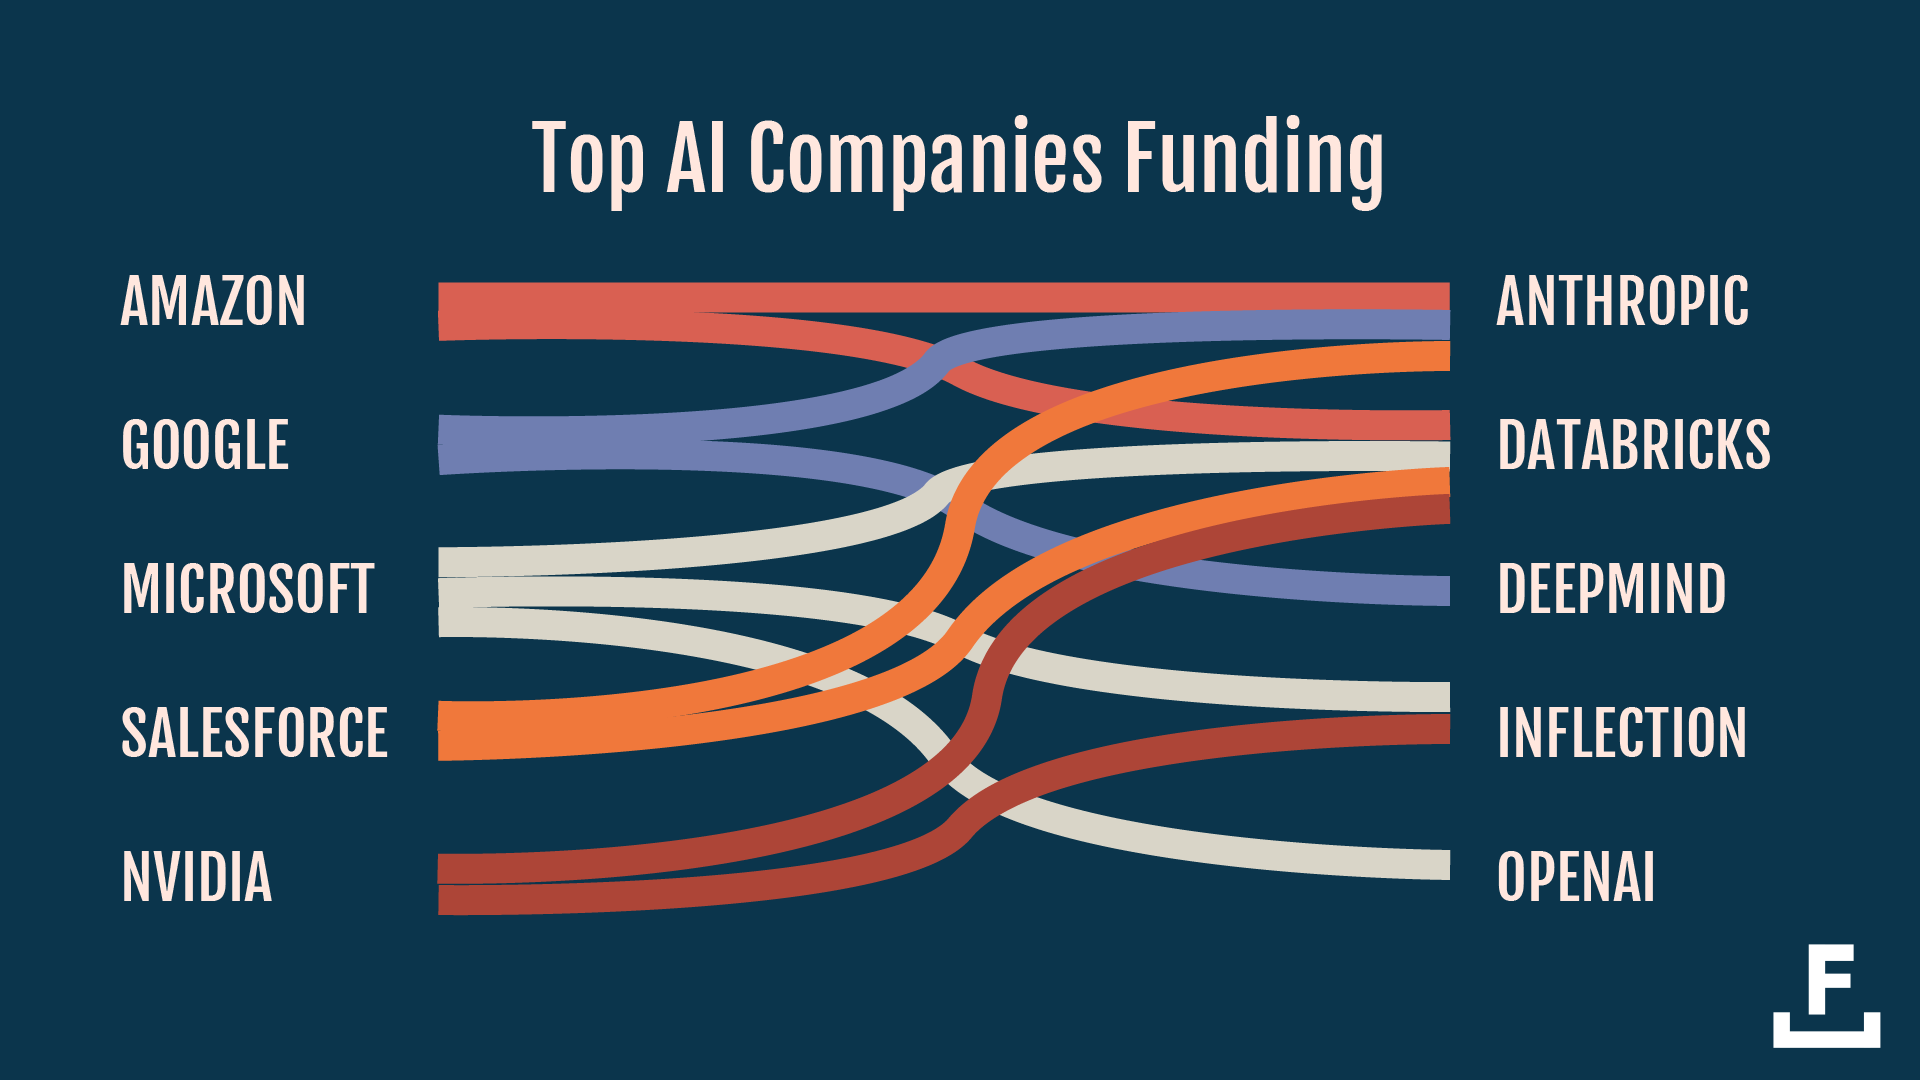 A chart showing the funding sources of the top 5 AI companies